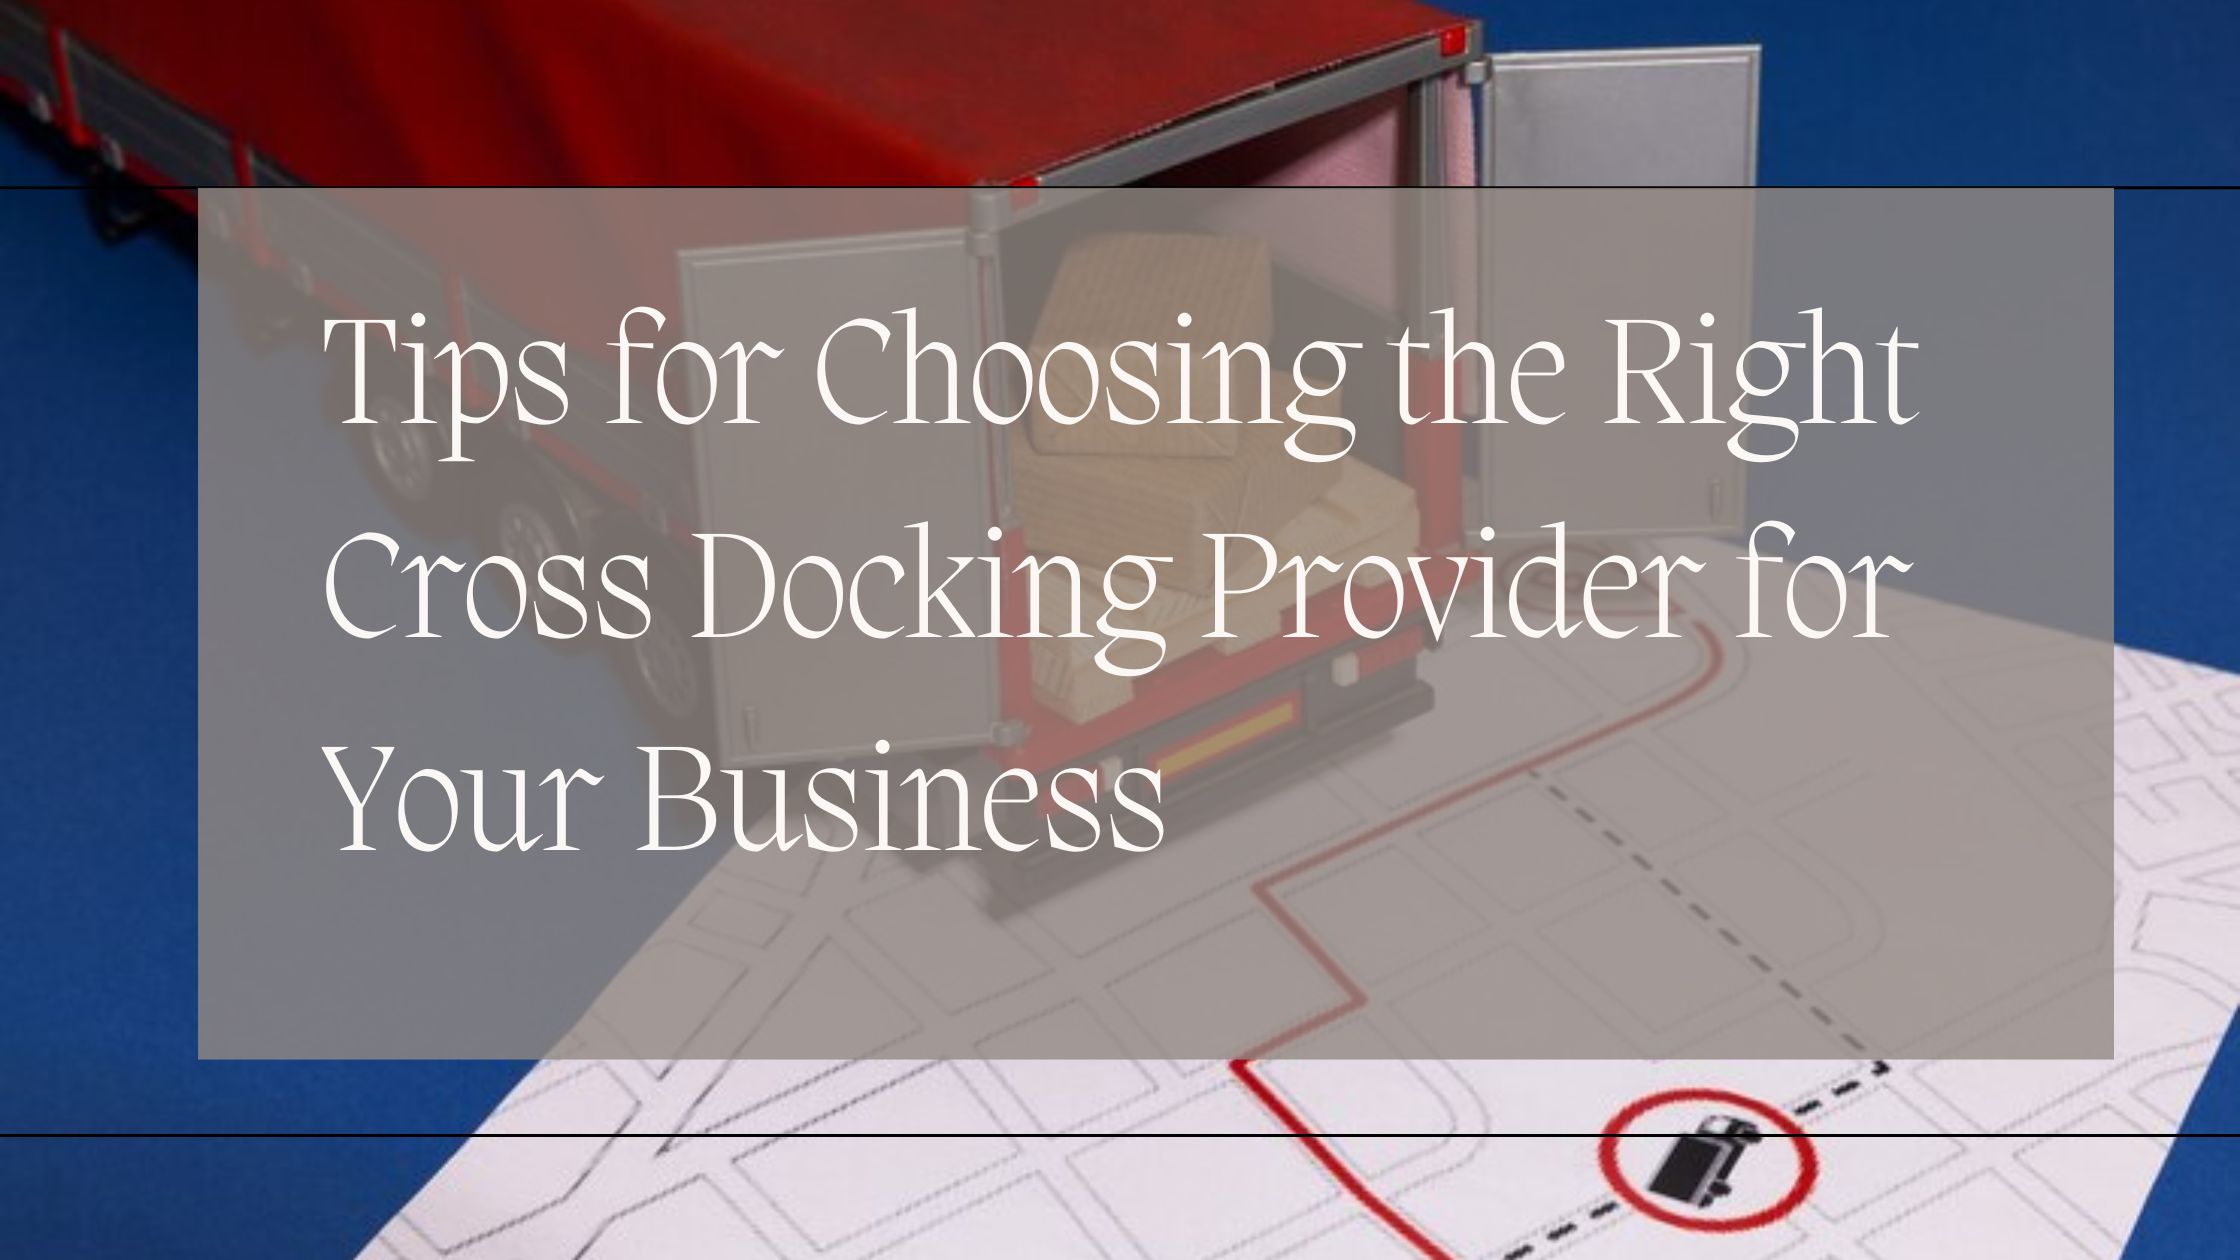 Tips for Choosing the Right Cross Docking Provider for Your Business